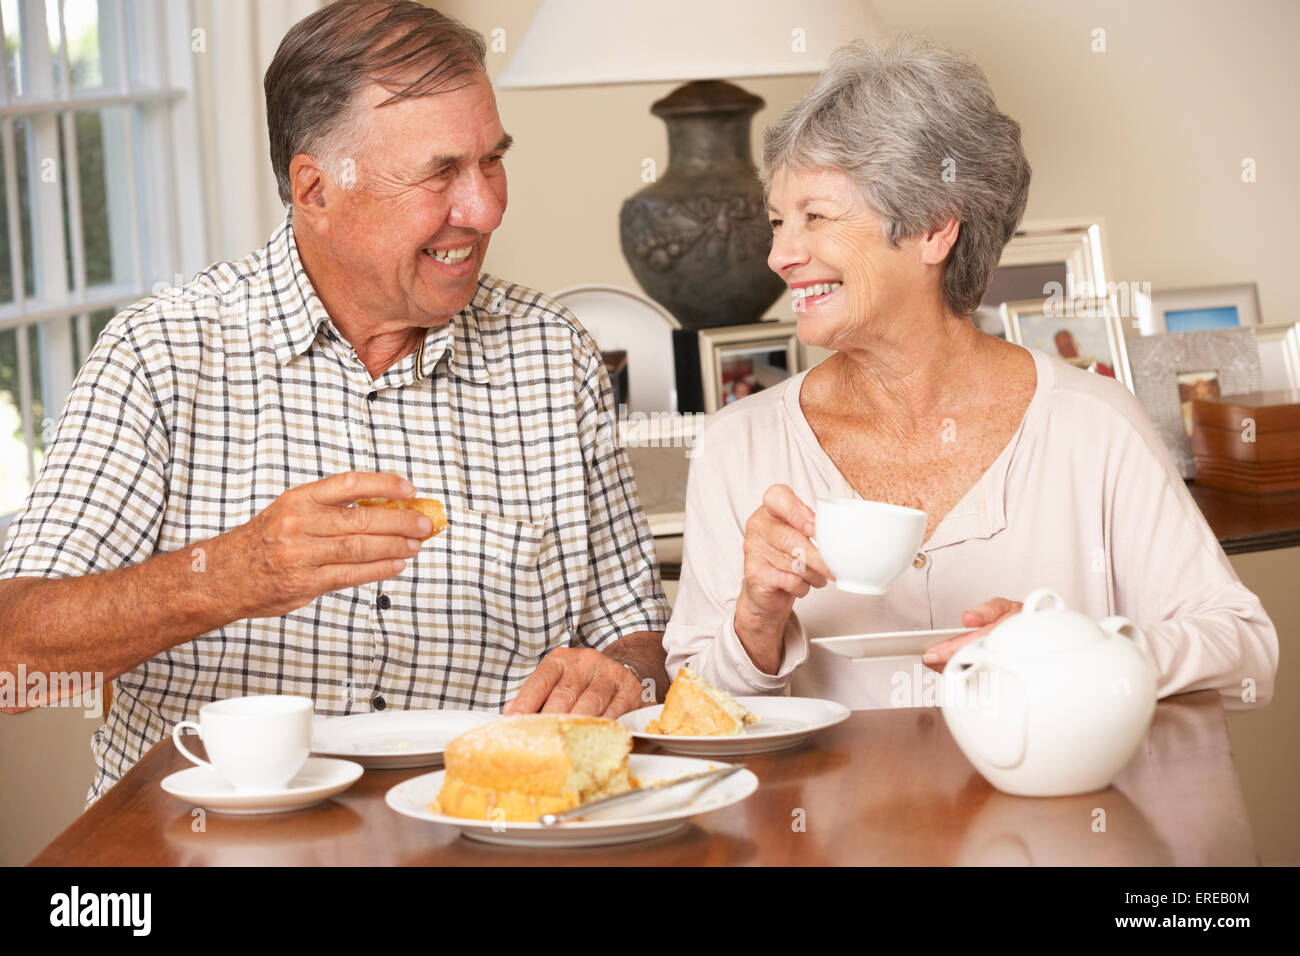 Retired Senior Couple Enjoying Afternoon Tea Together At Home Stock Photo